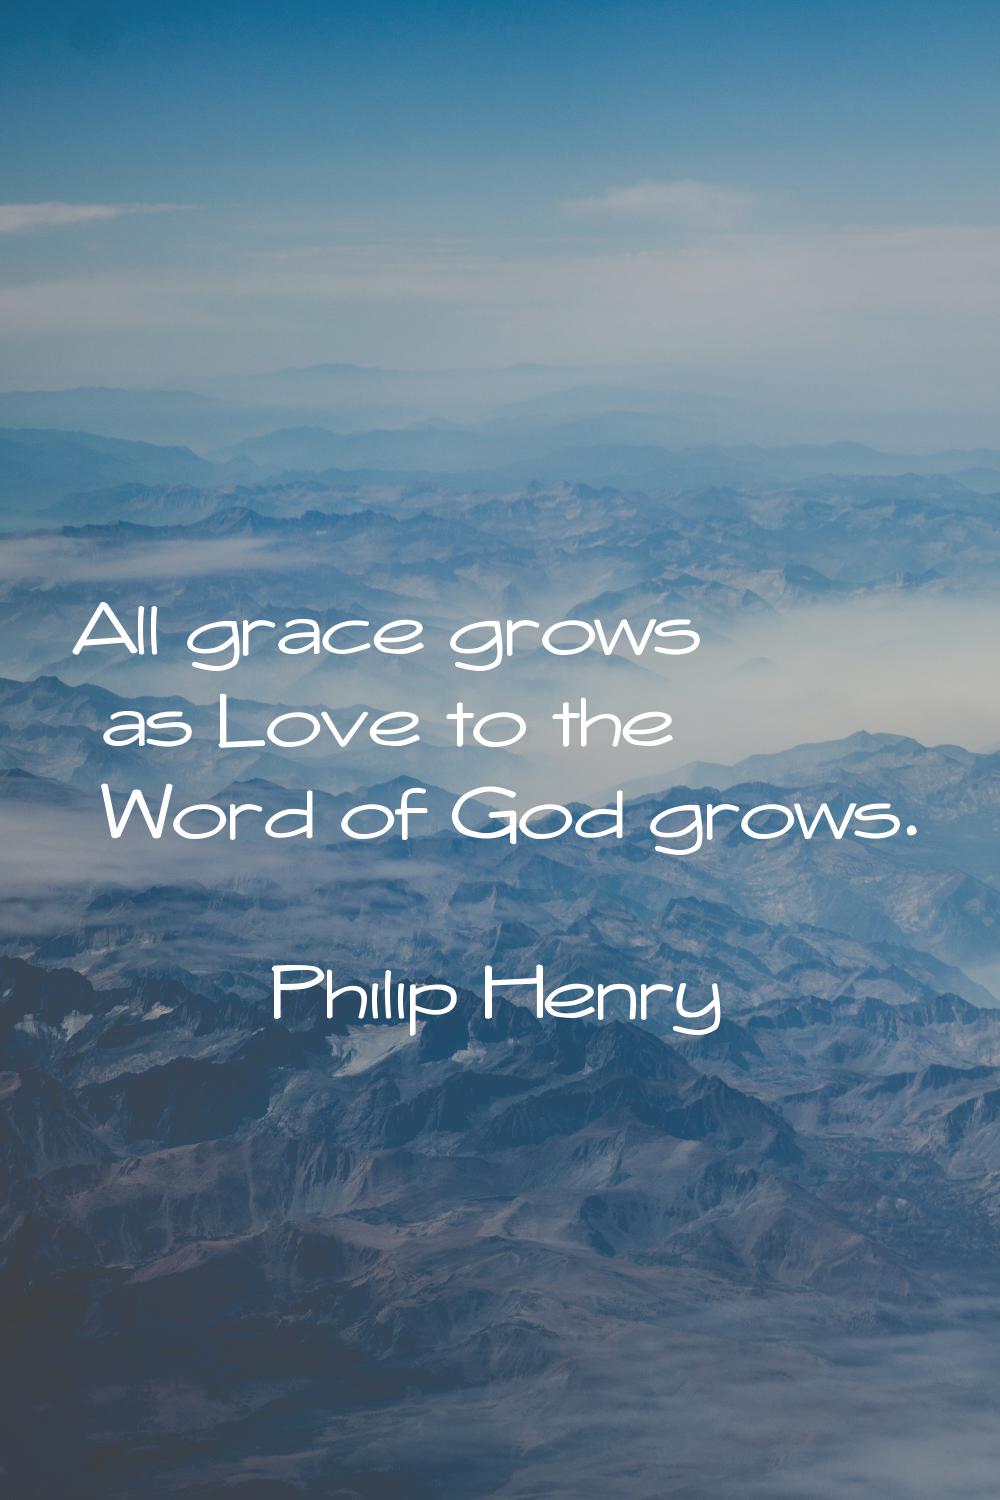 All grace grows as Love to the Word of God grows.